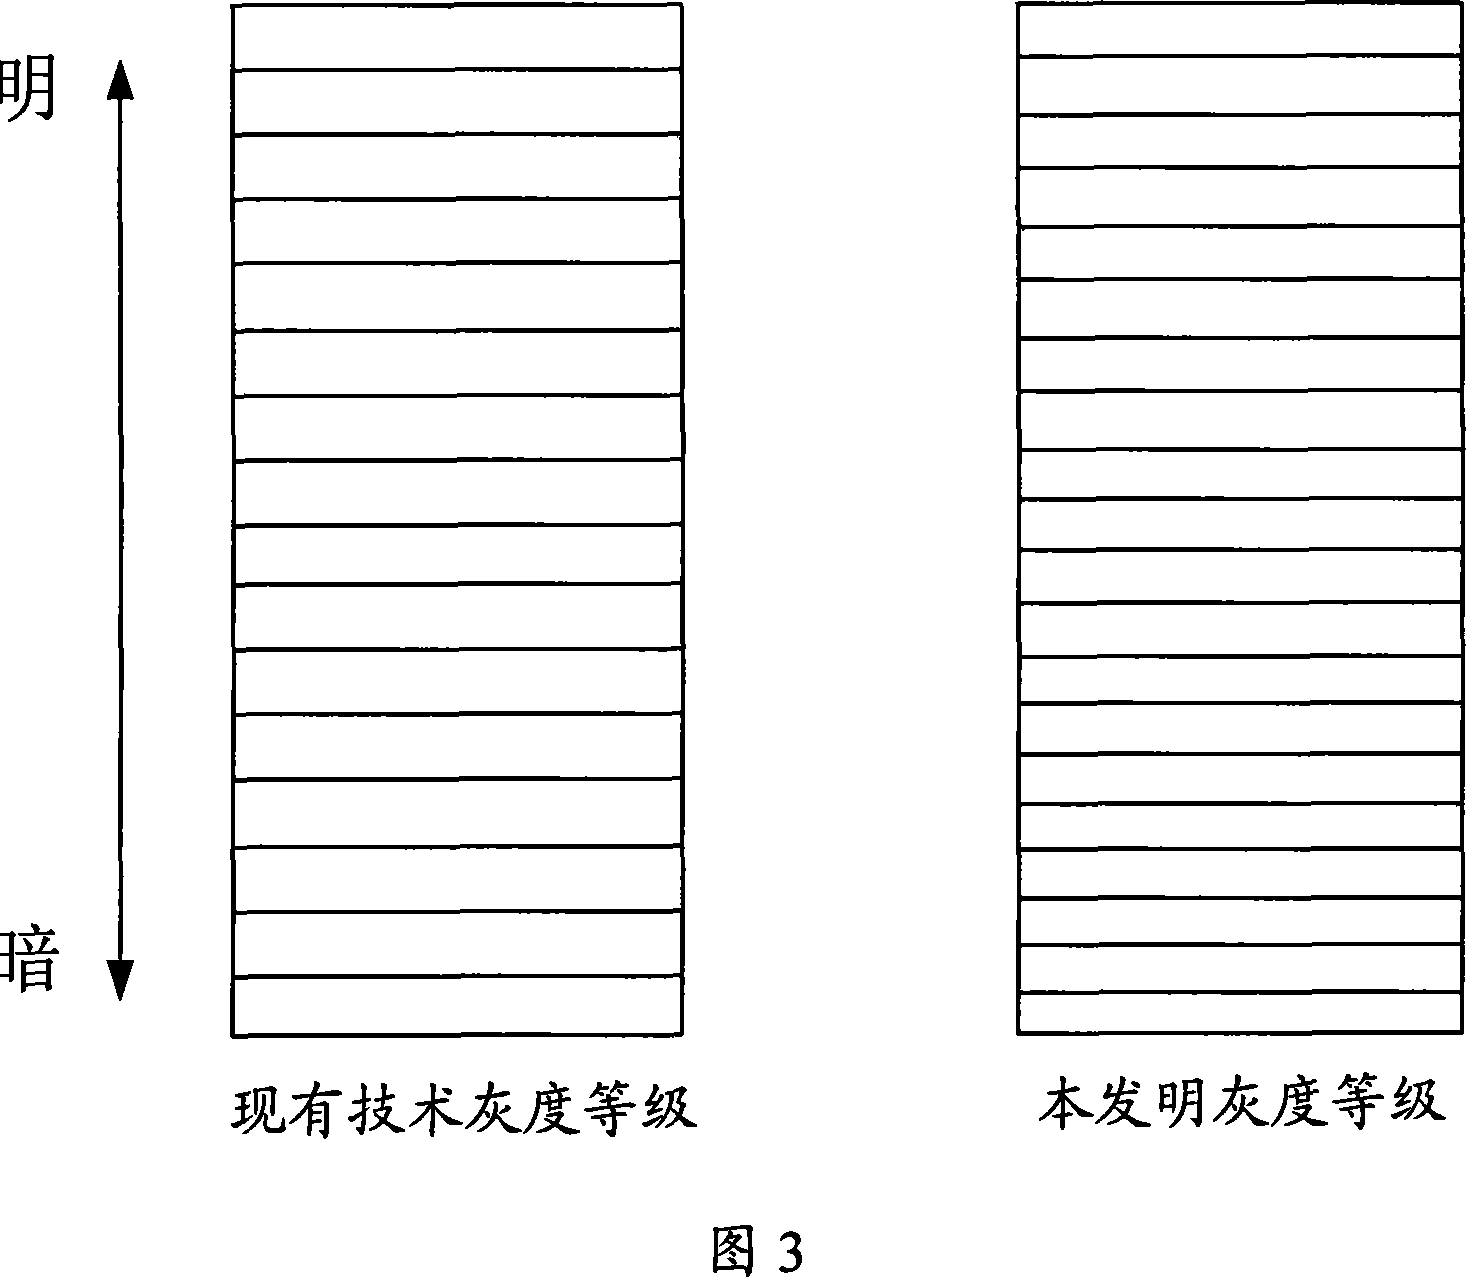 Method for improving picture quality level of display image based on human vision property